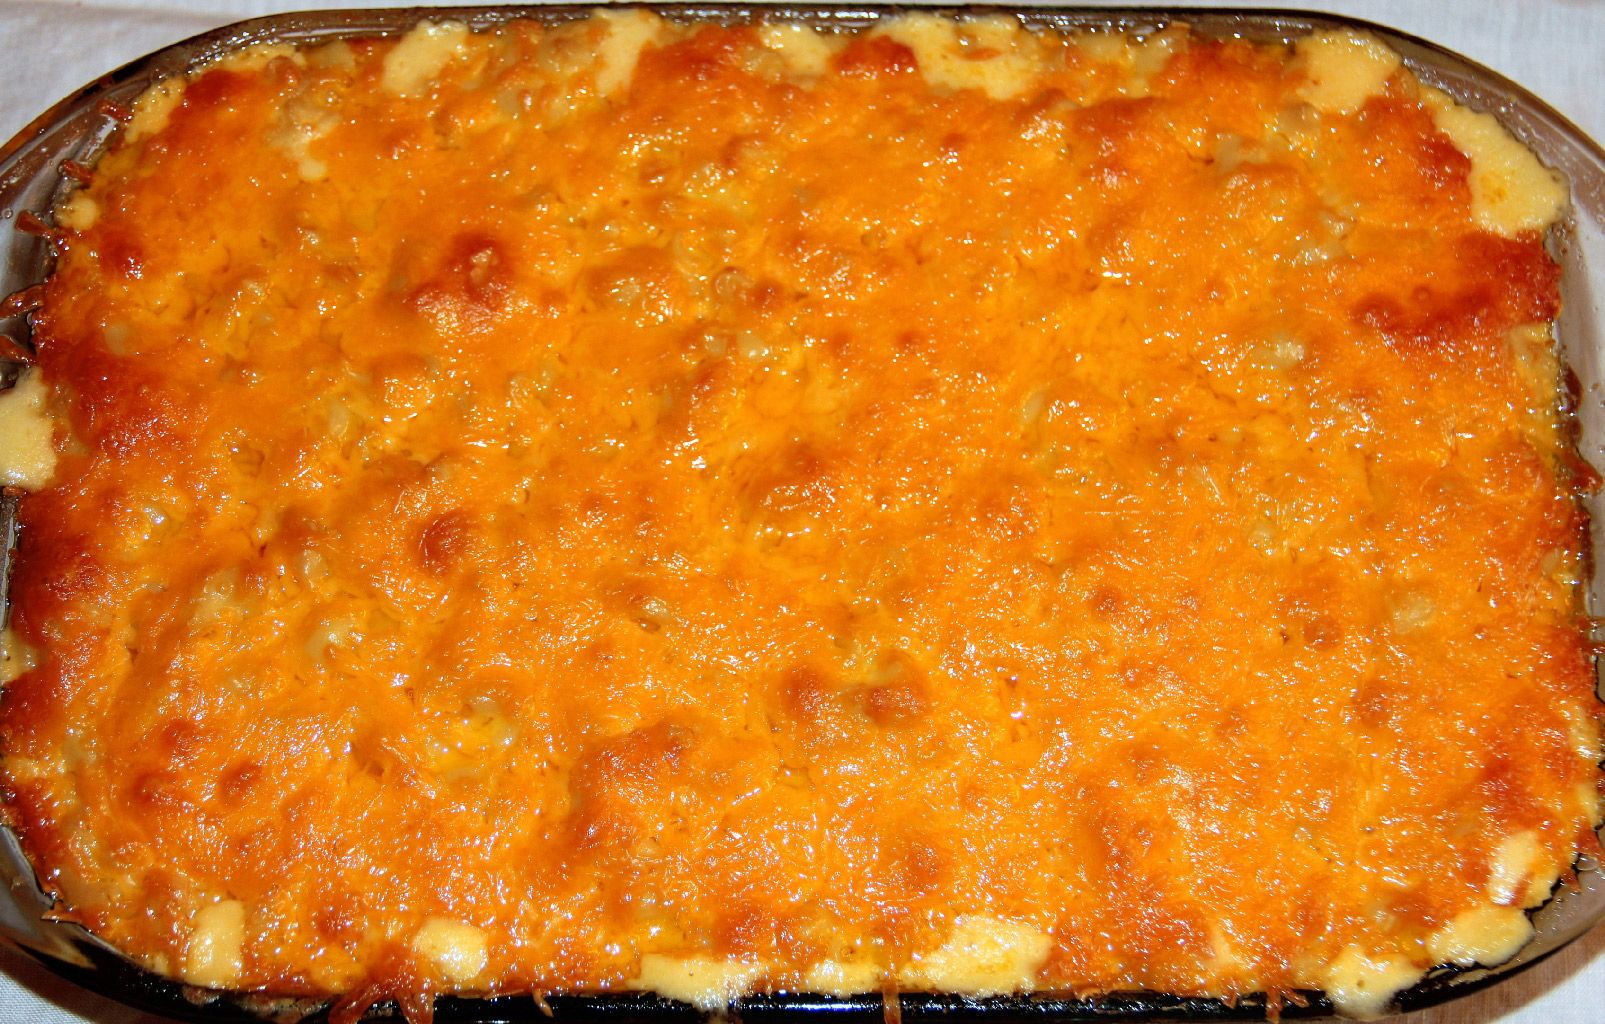 Baked Macaroni And Cheese No Egg
 The best baked macaroni and cheese no eggs just a creamy